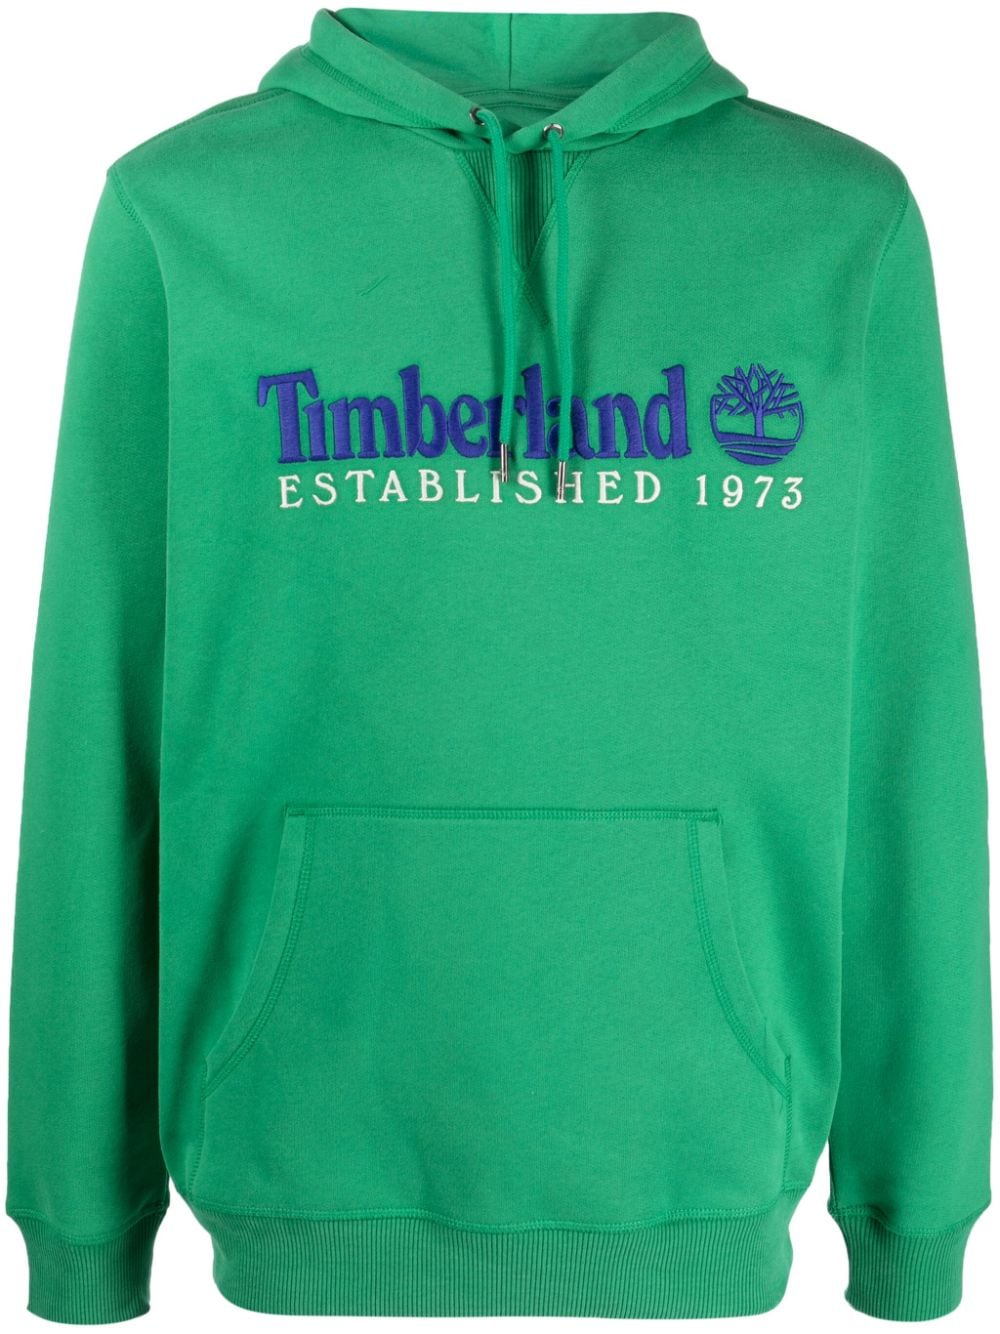 Green Hoodie with front logo